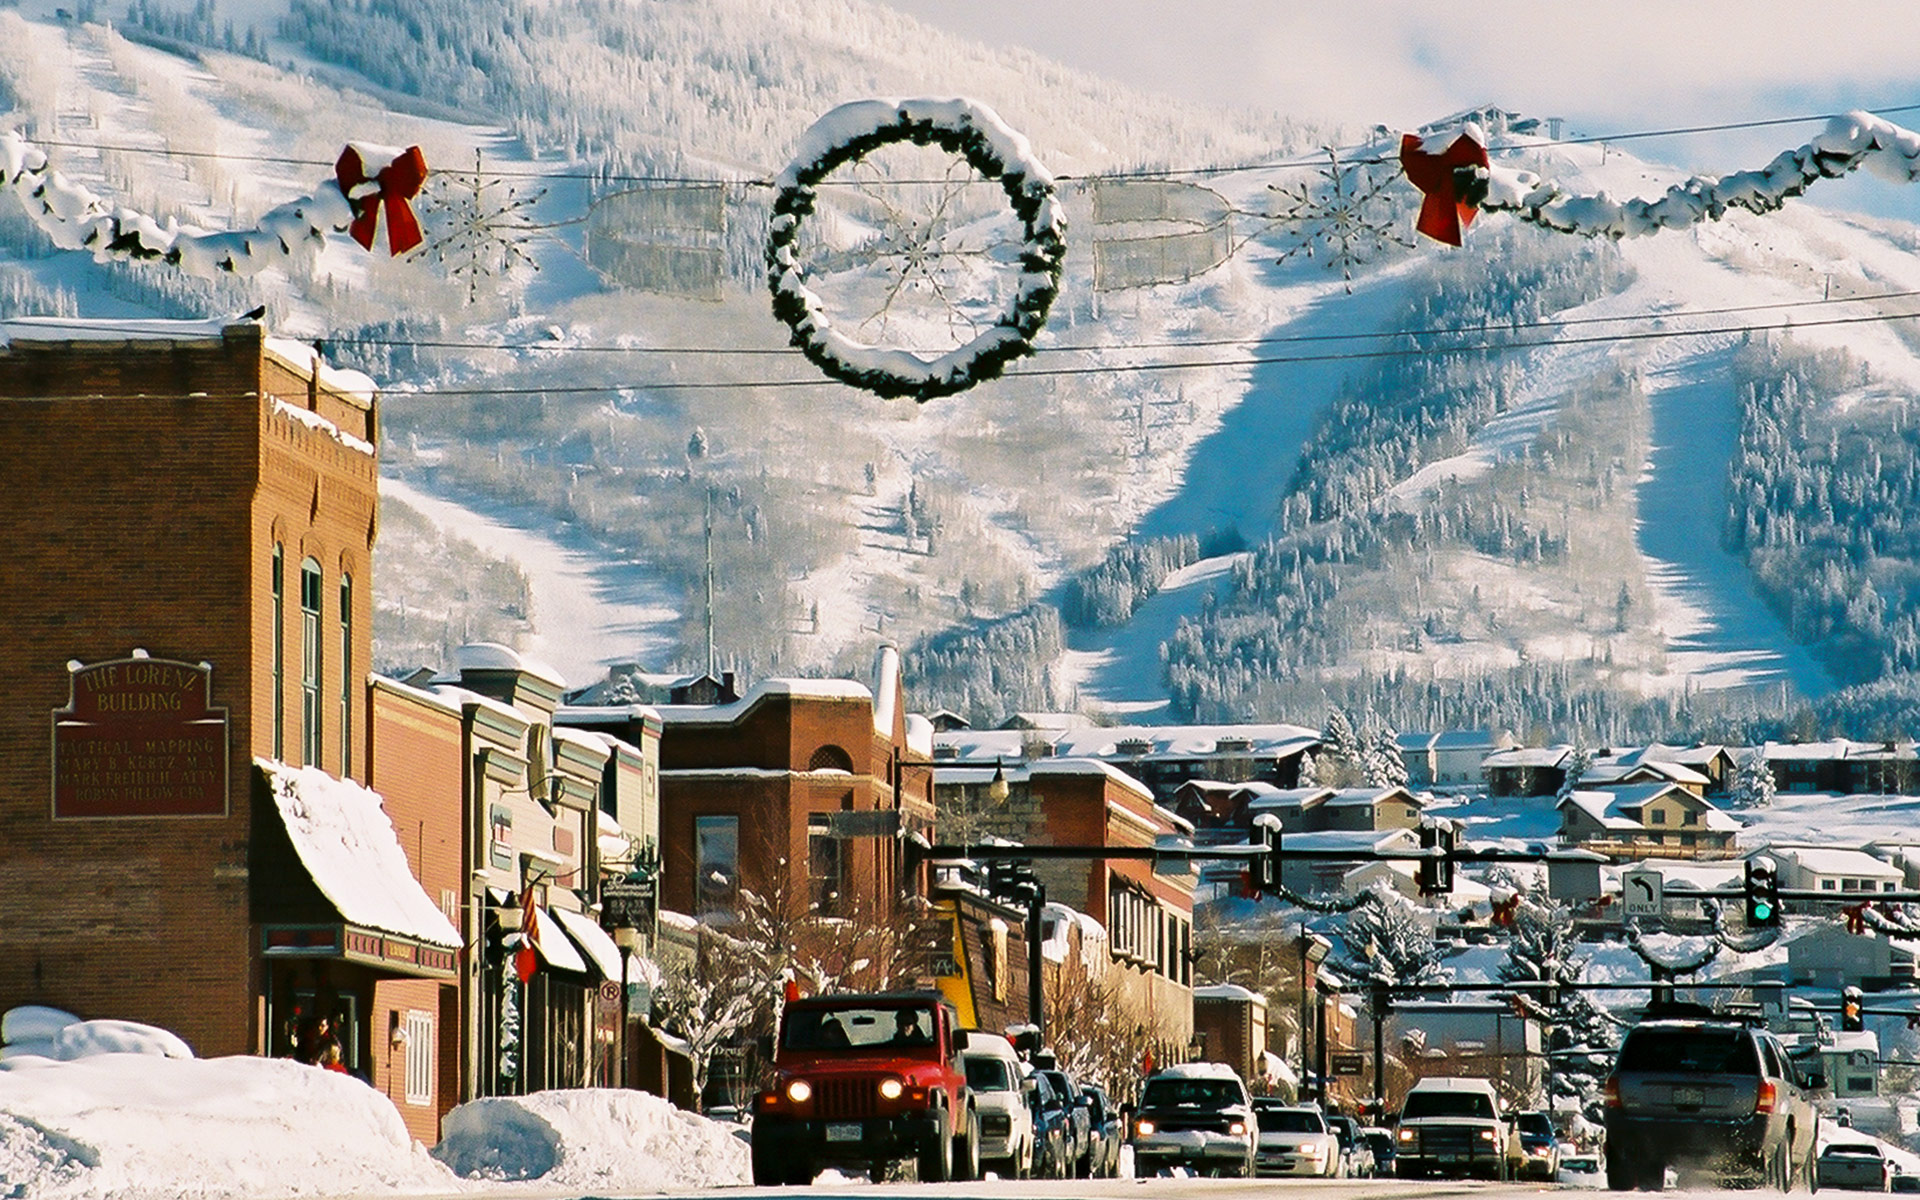 Christmas And New Years In Steamboat Springs Is Nothing Short Of Magical Imagine Ling Lights Dd From Buildings Trees Streets Ered White